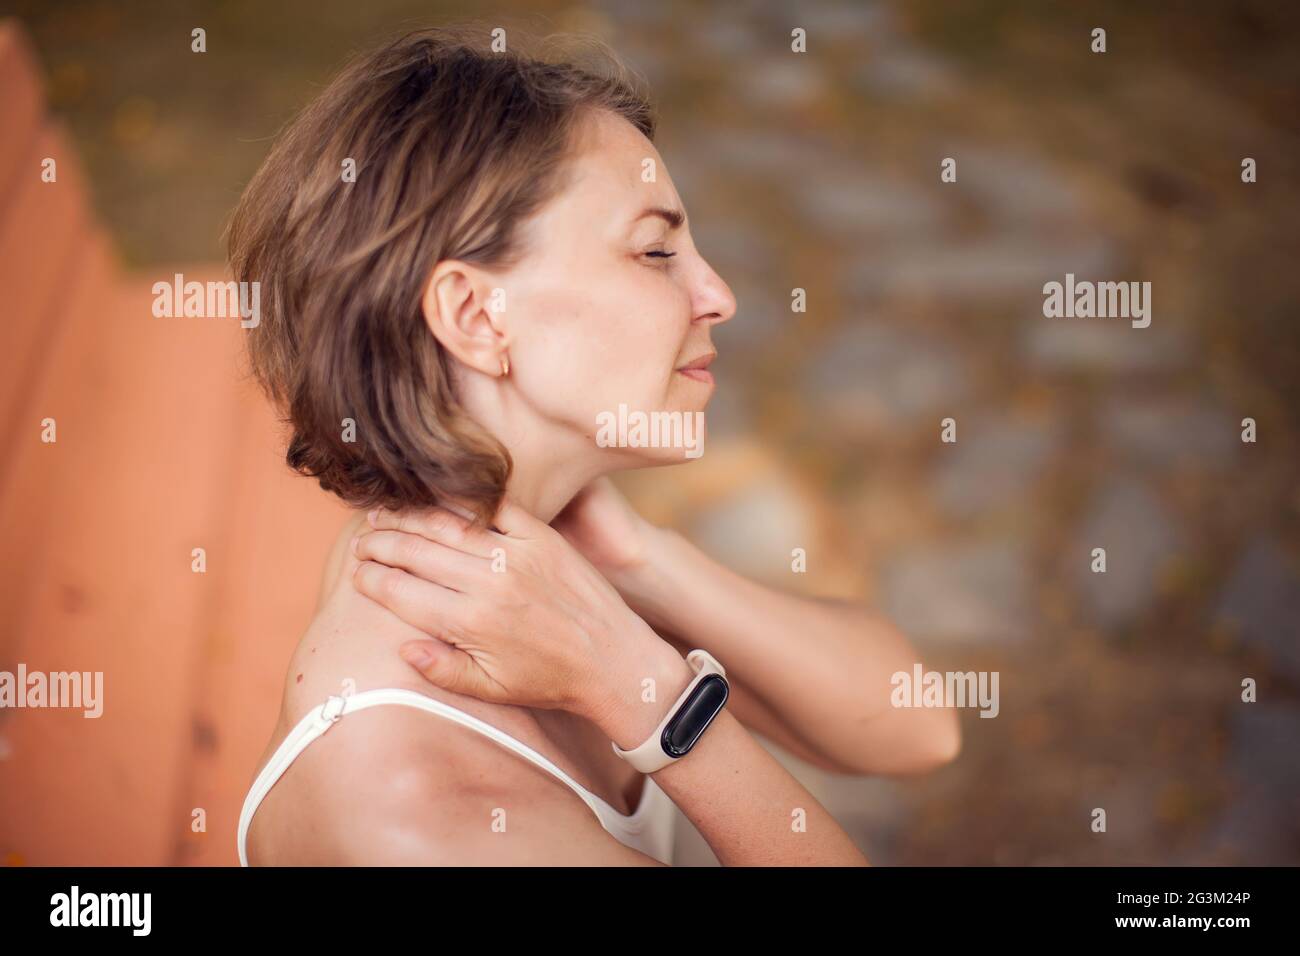 Woman with neck pain in the park. Healthcare and medicine concept Stock Photo